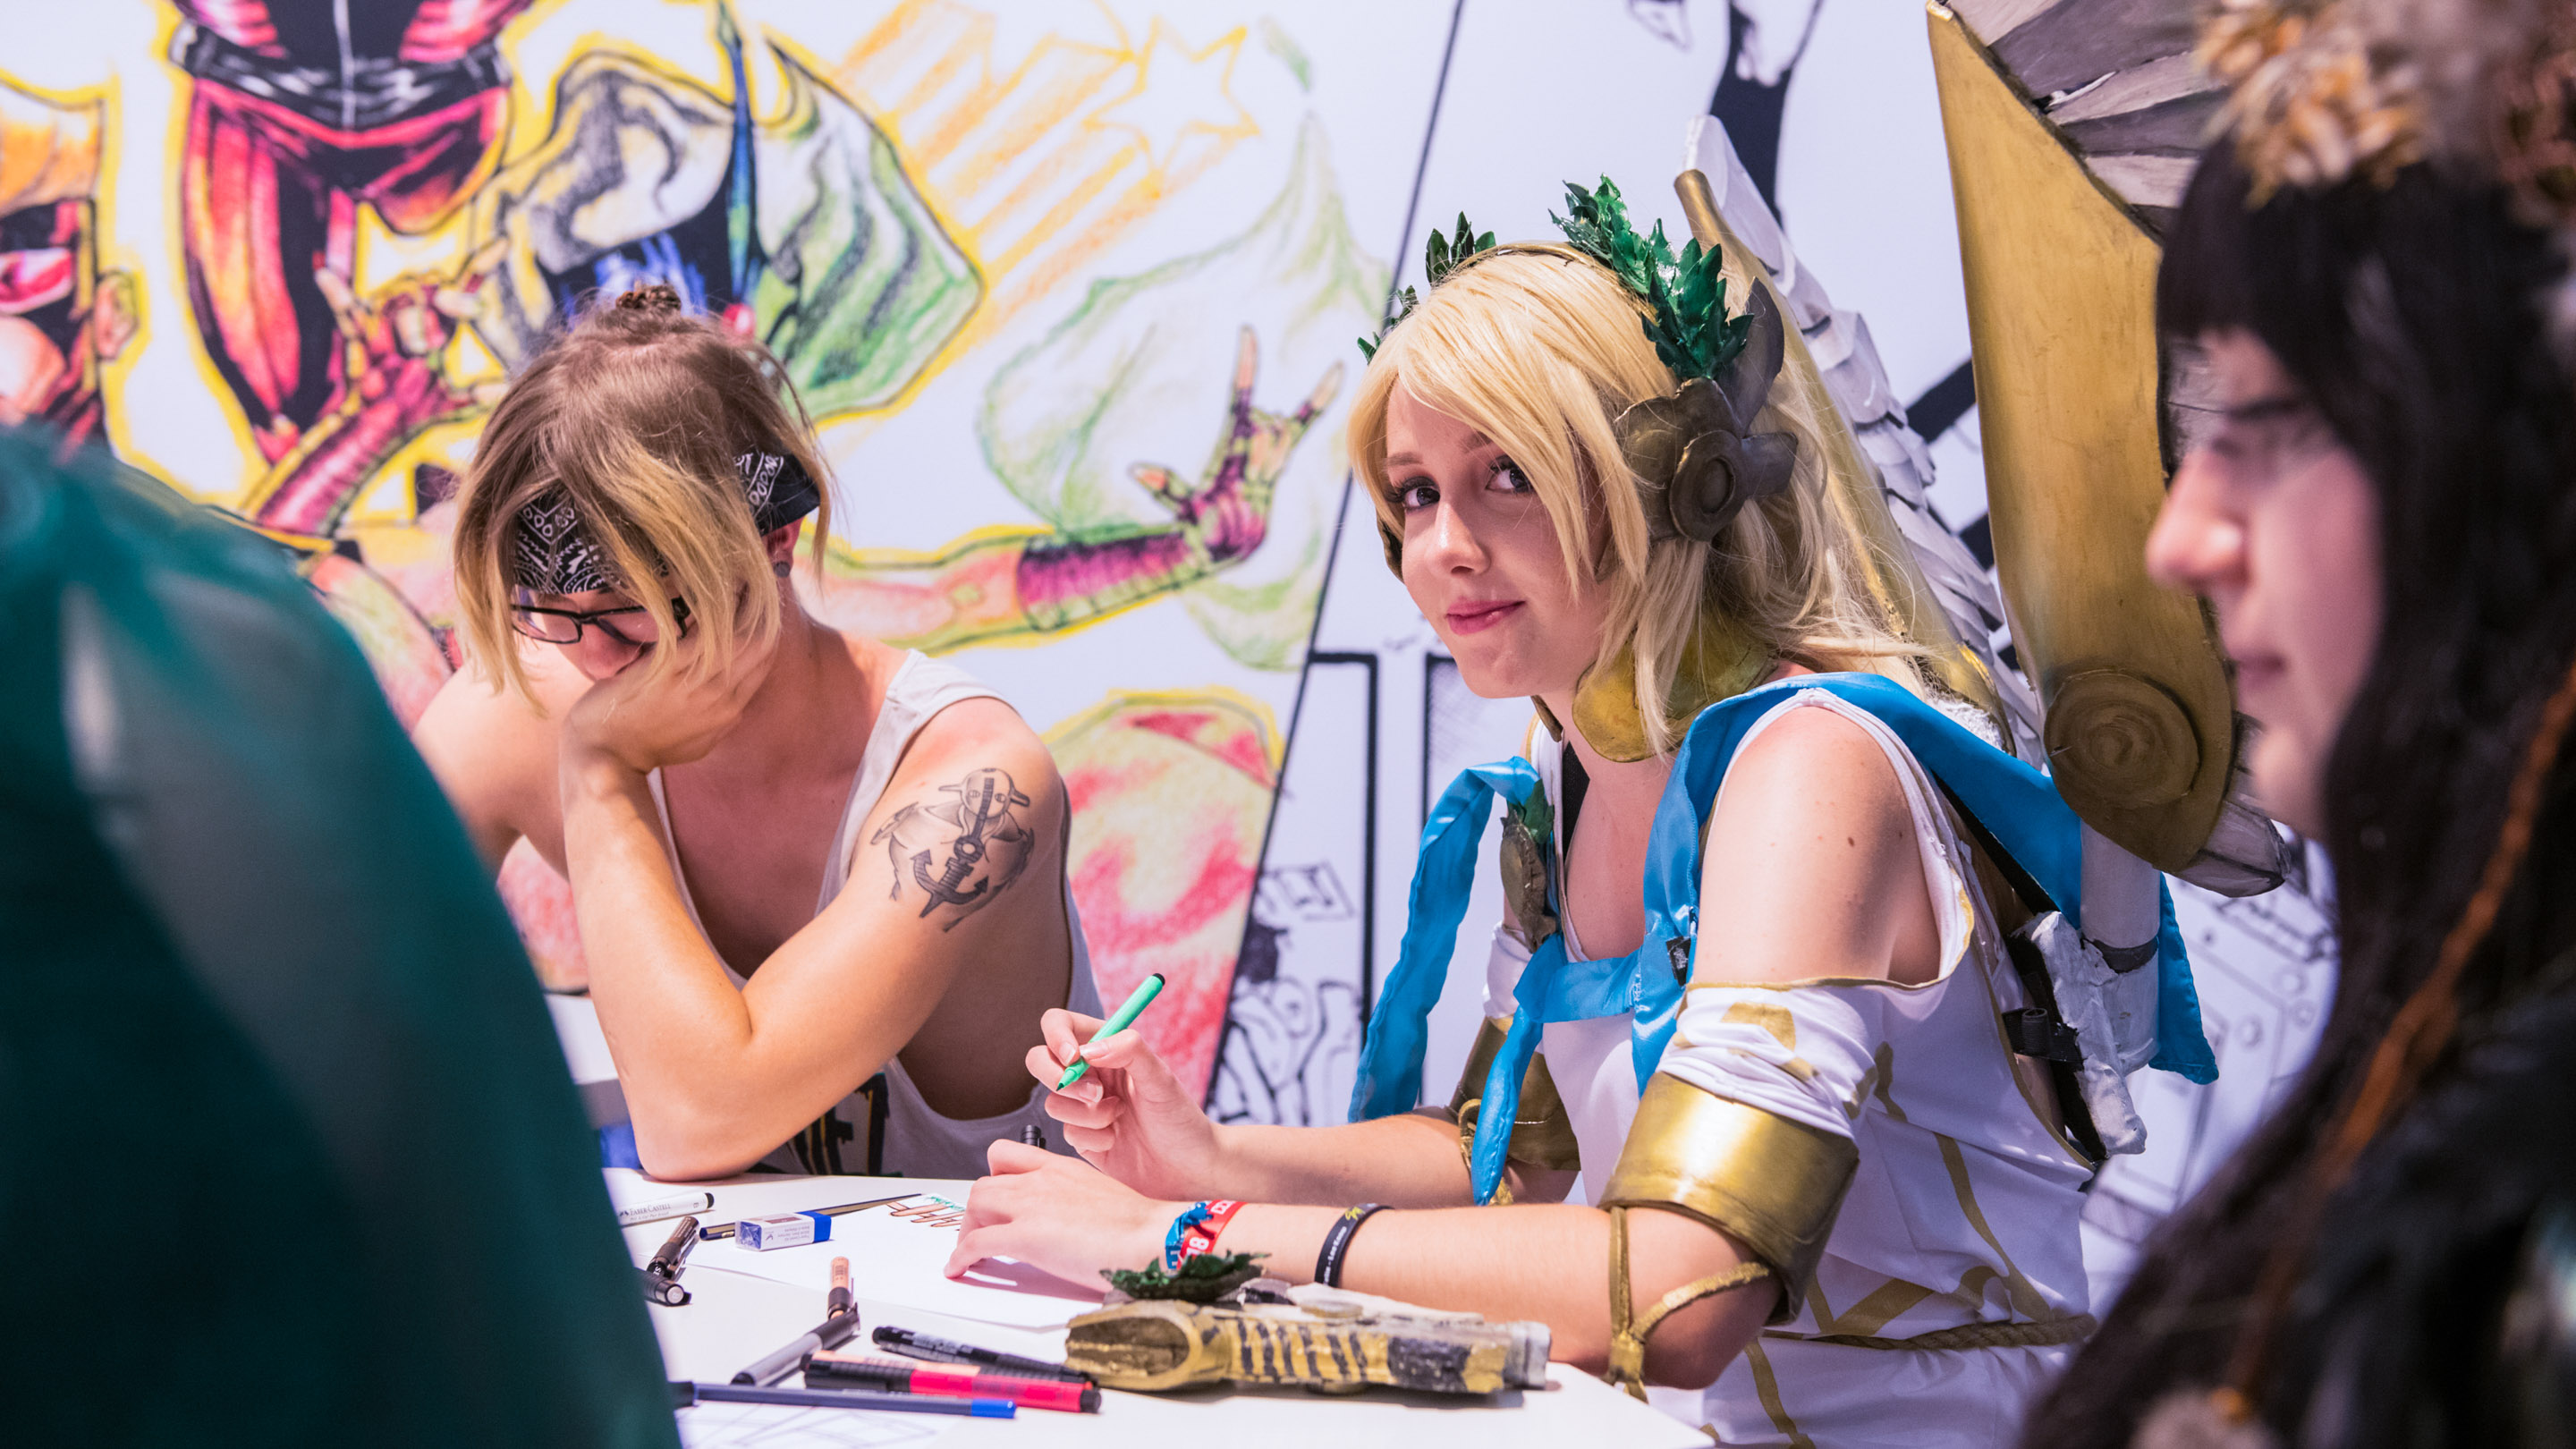 Stand: Faber-Castell, Halle 7, Comic Con Experience 2019